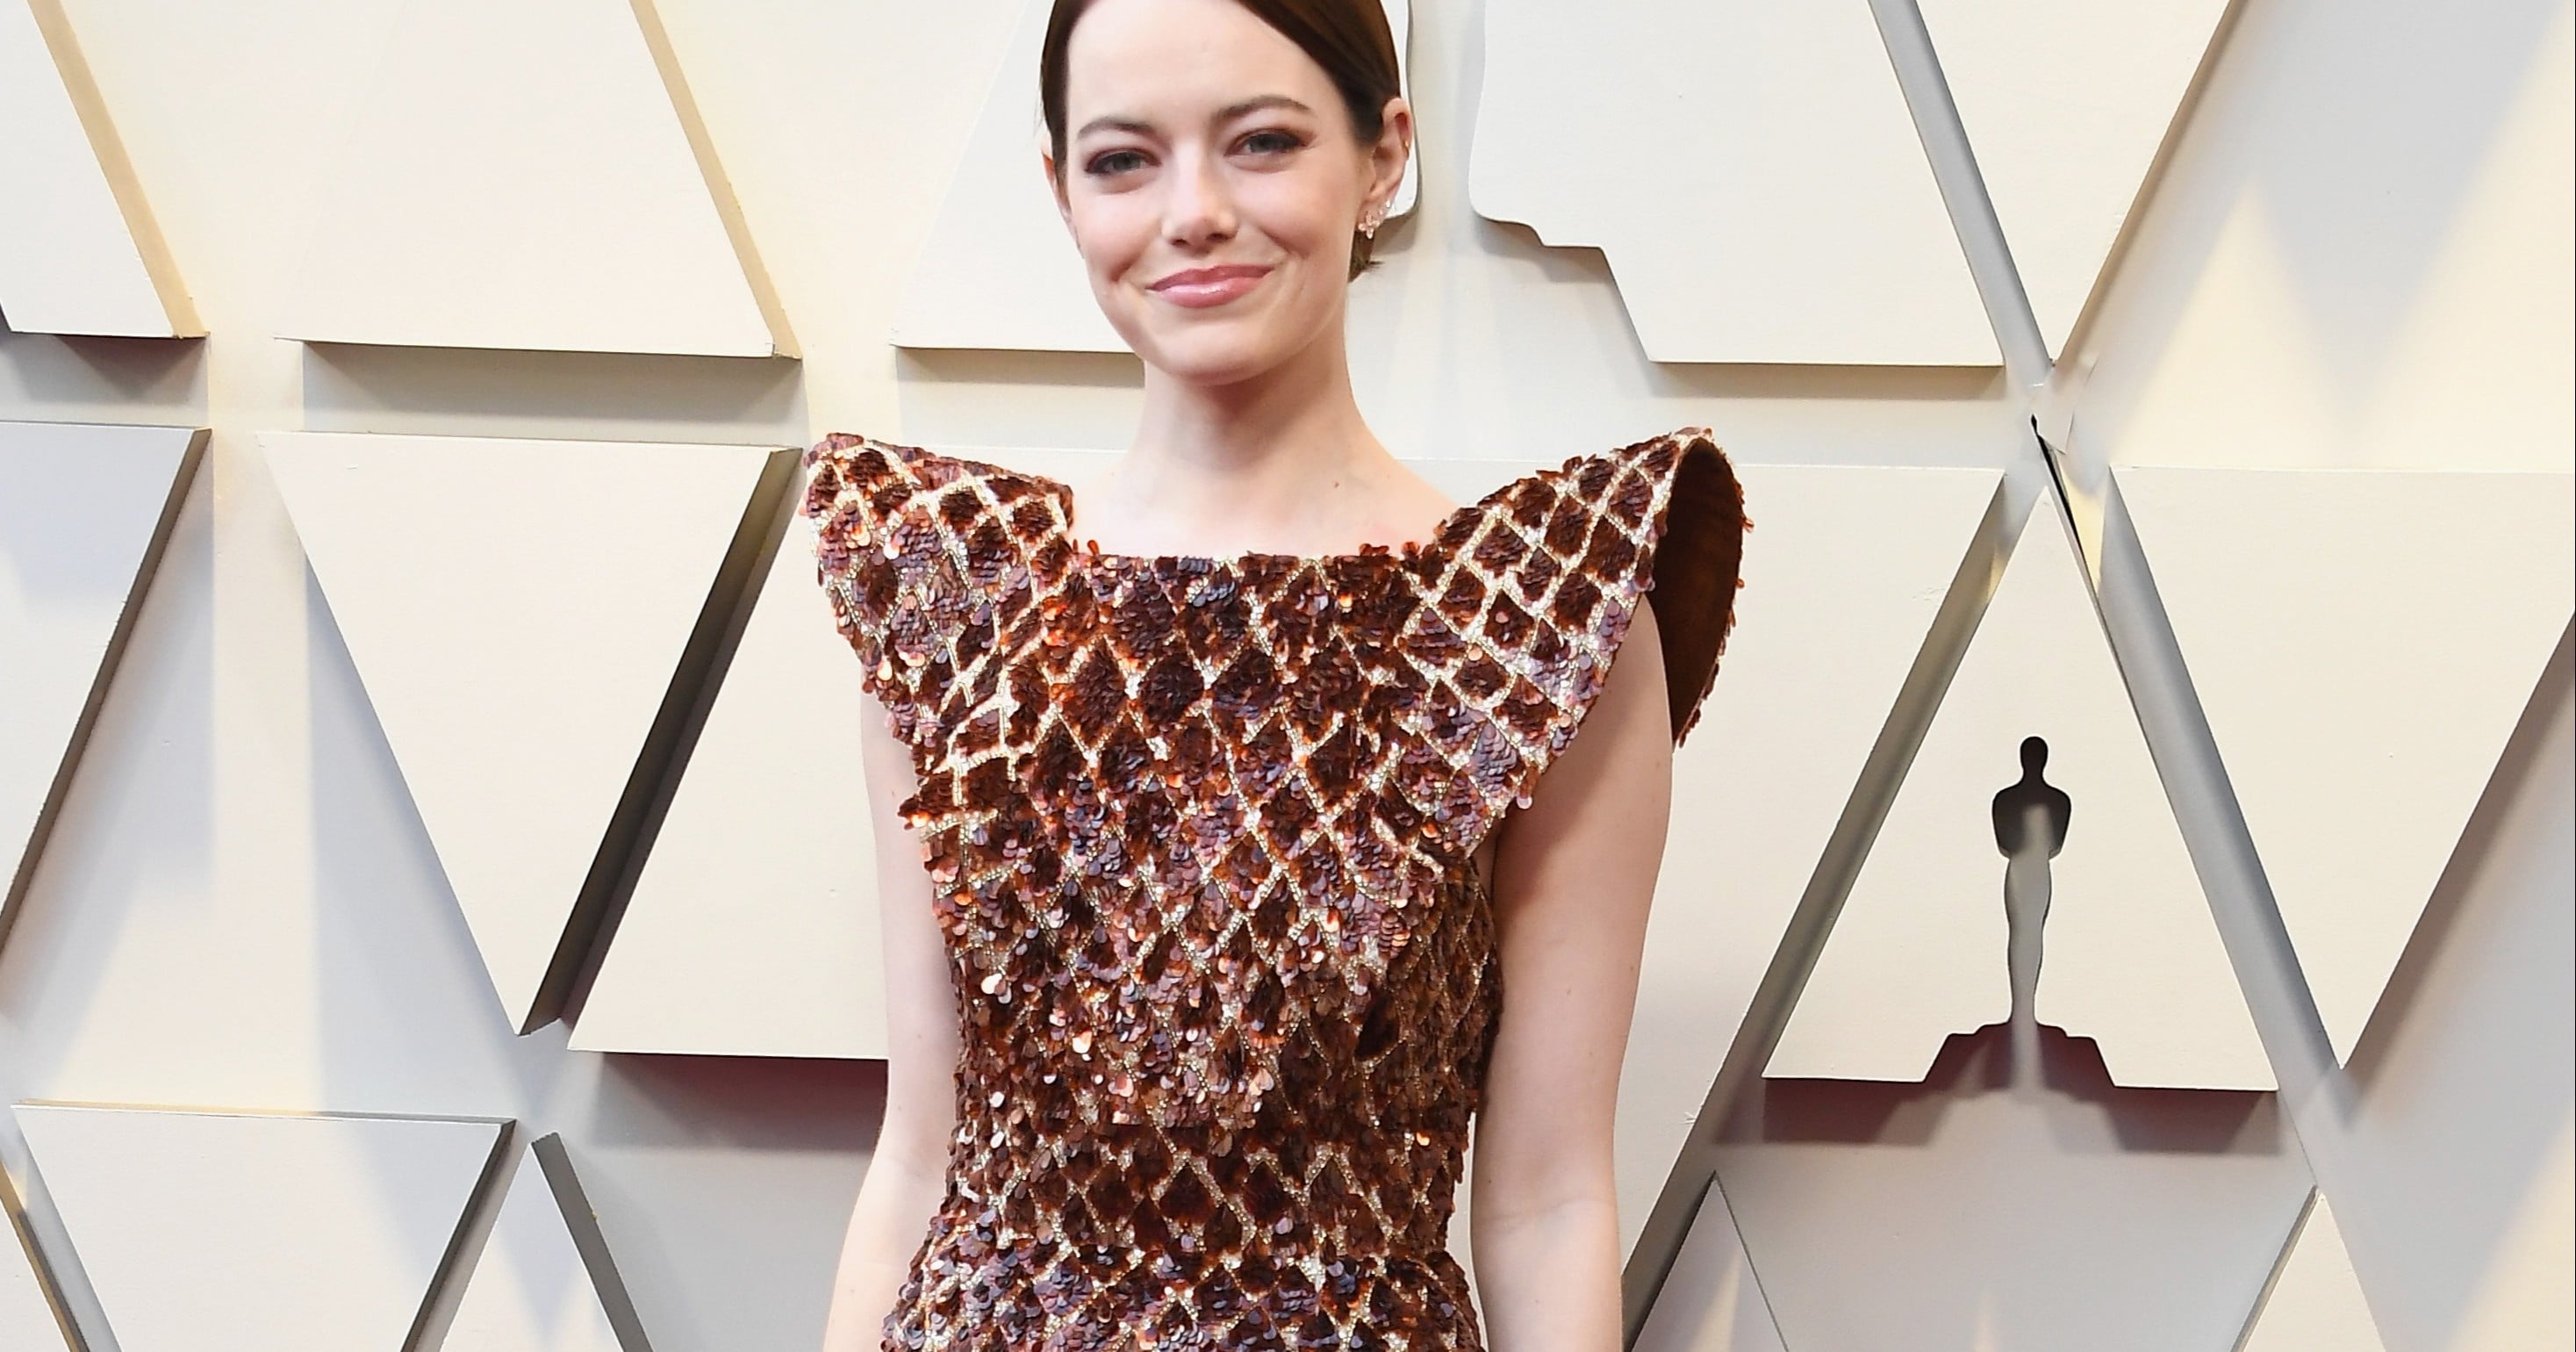 Emma Stone's Magnificently Patterned Louis Vuitton Dress At The 2019 Oscars